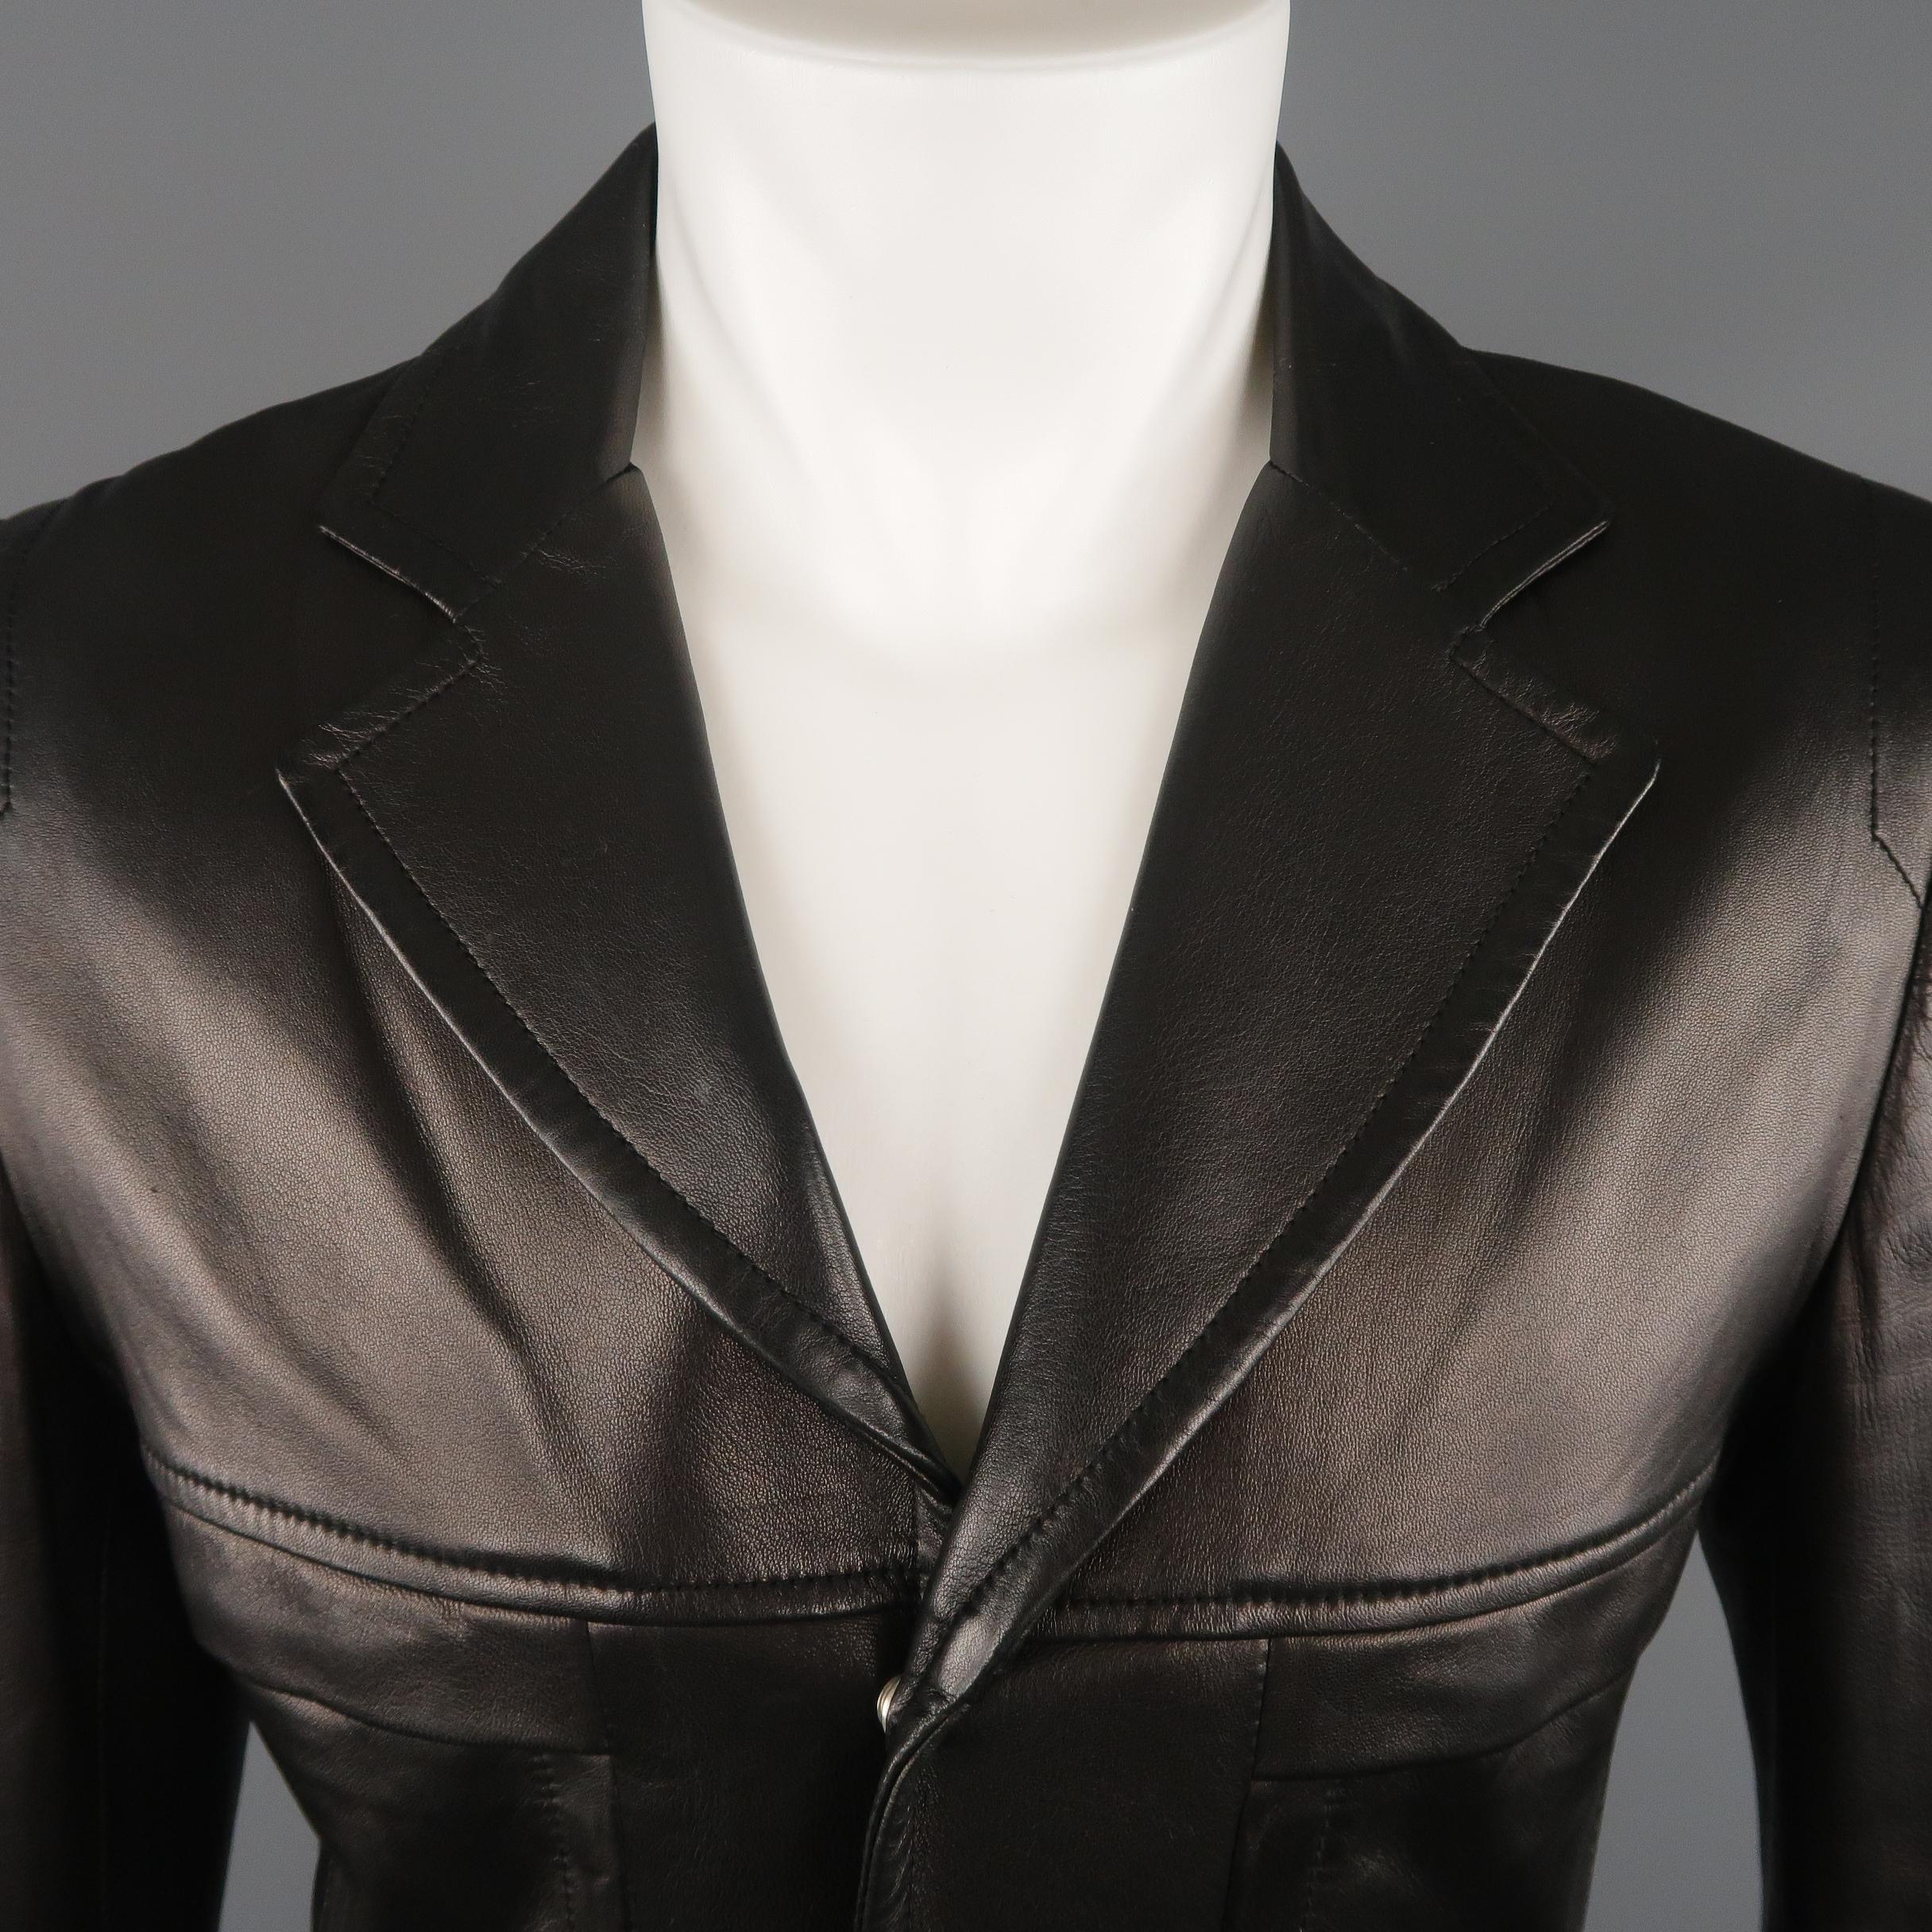 NARCISO RODRIGUEZ blazer comes in soft black sheepskin leather with a notch lapel, slit pockets, zip cuffs, and zip up front with snap placket. Wear throughout. Made in Italy.
 
Very Good Pre-Owned Condition.
Marked: IT 48
 
Measurements:
